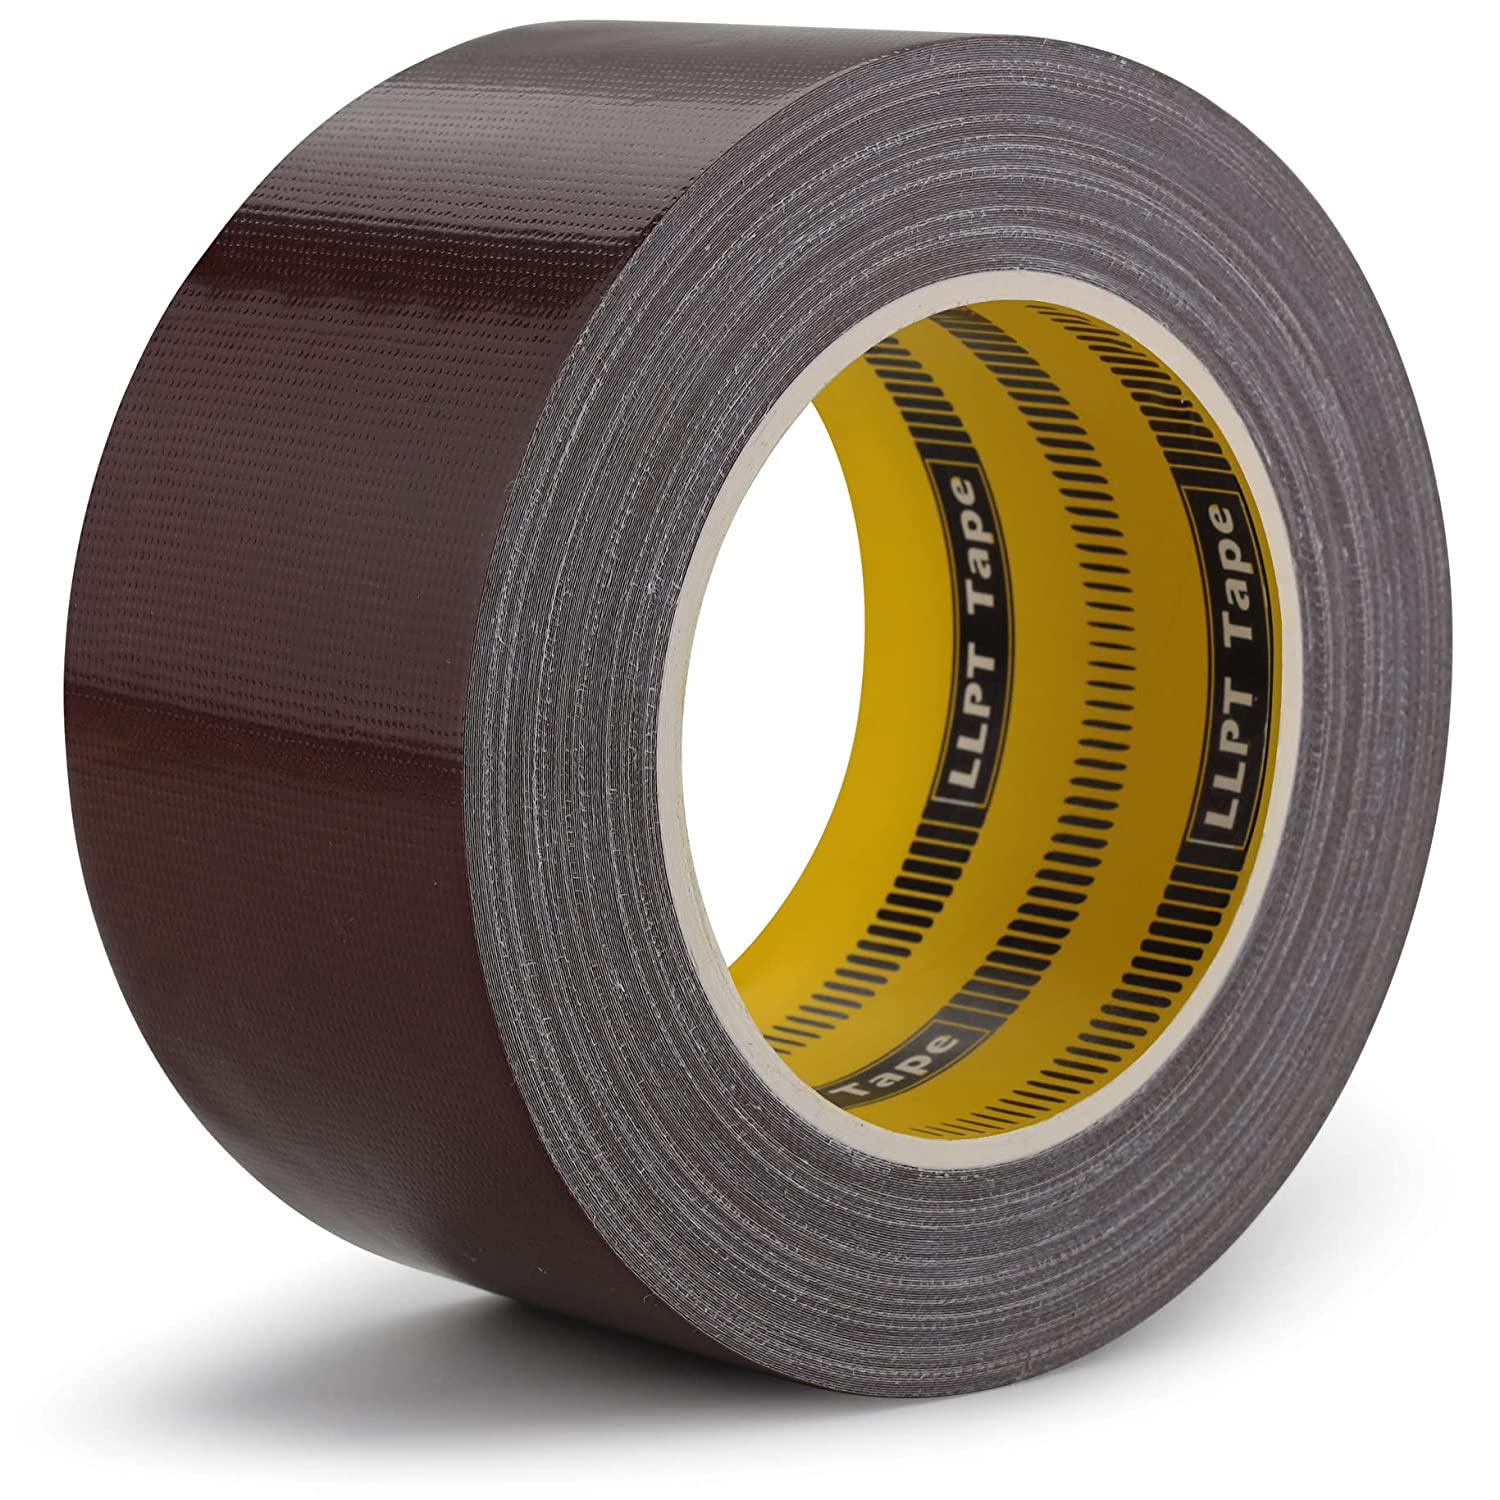 LLPT, LLPT Duct Tape Premium Grade 2.36 Inches x 108 Feet x 11 Mil Easy Tear Residue Free Strong Adhesive Color Dark Brown (DT254)